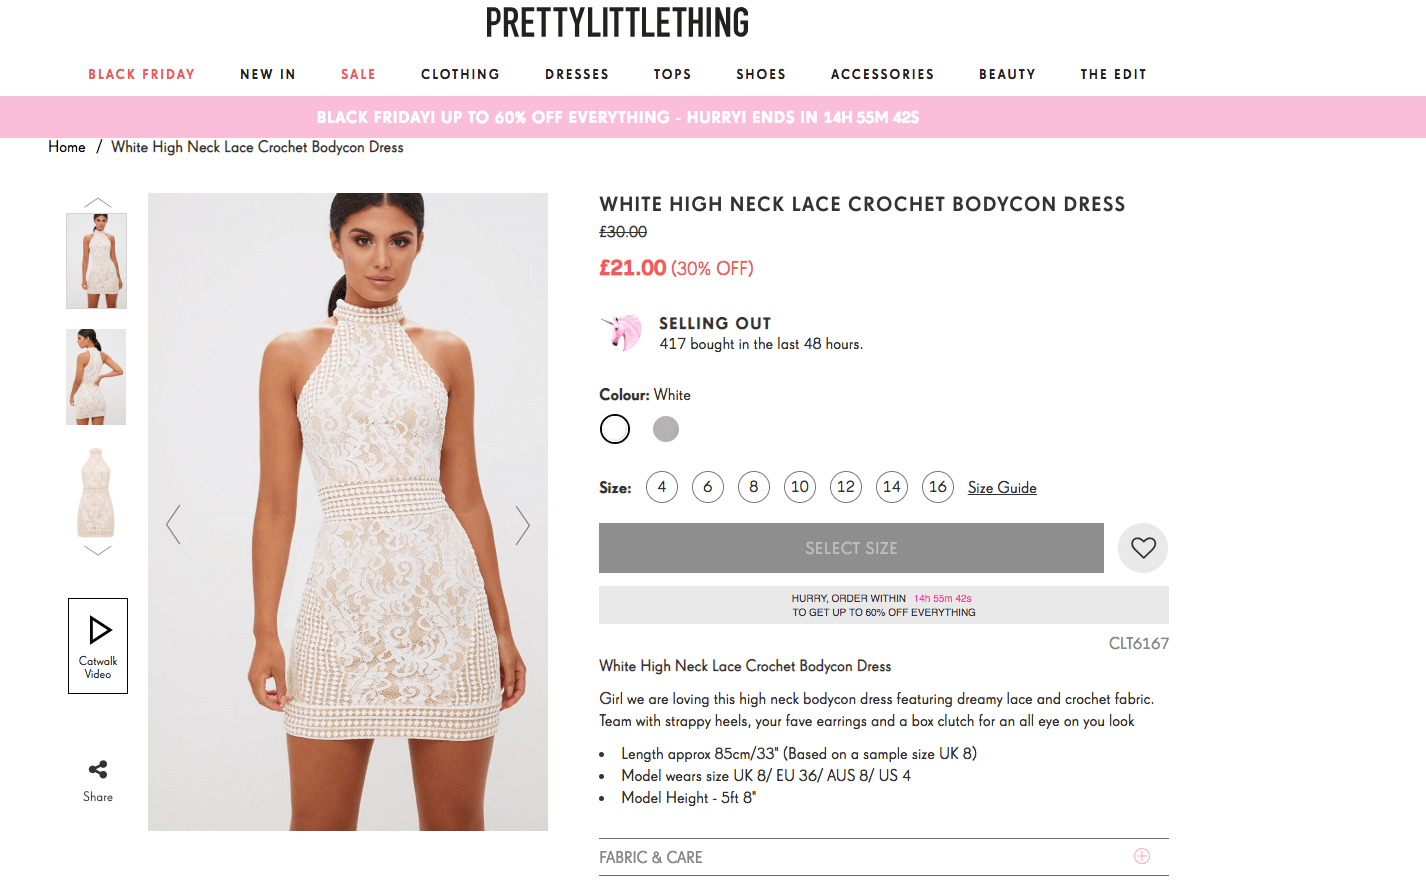 PrettyLittleThing with their selling out notification